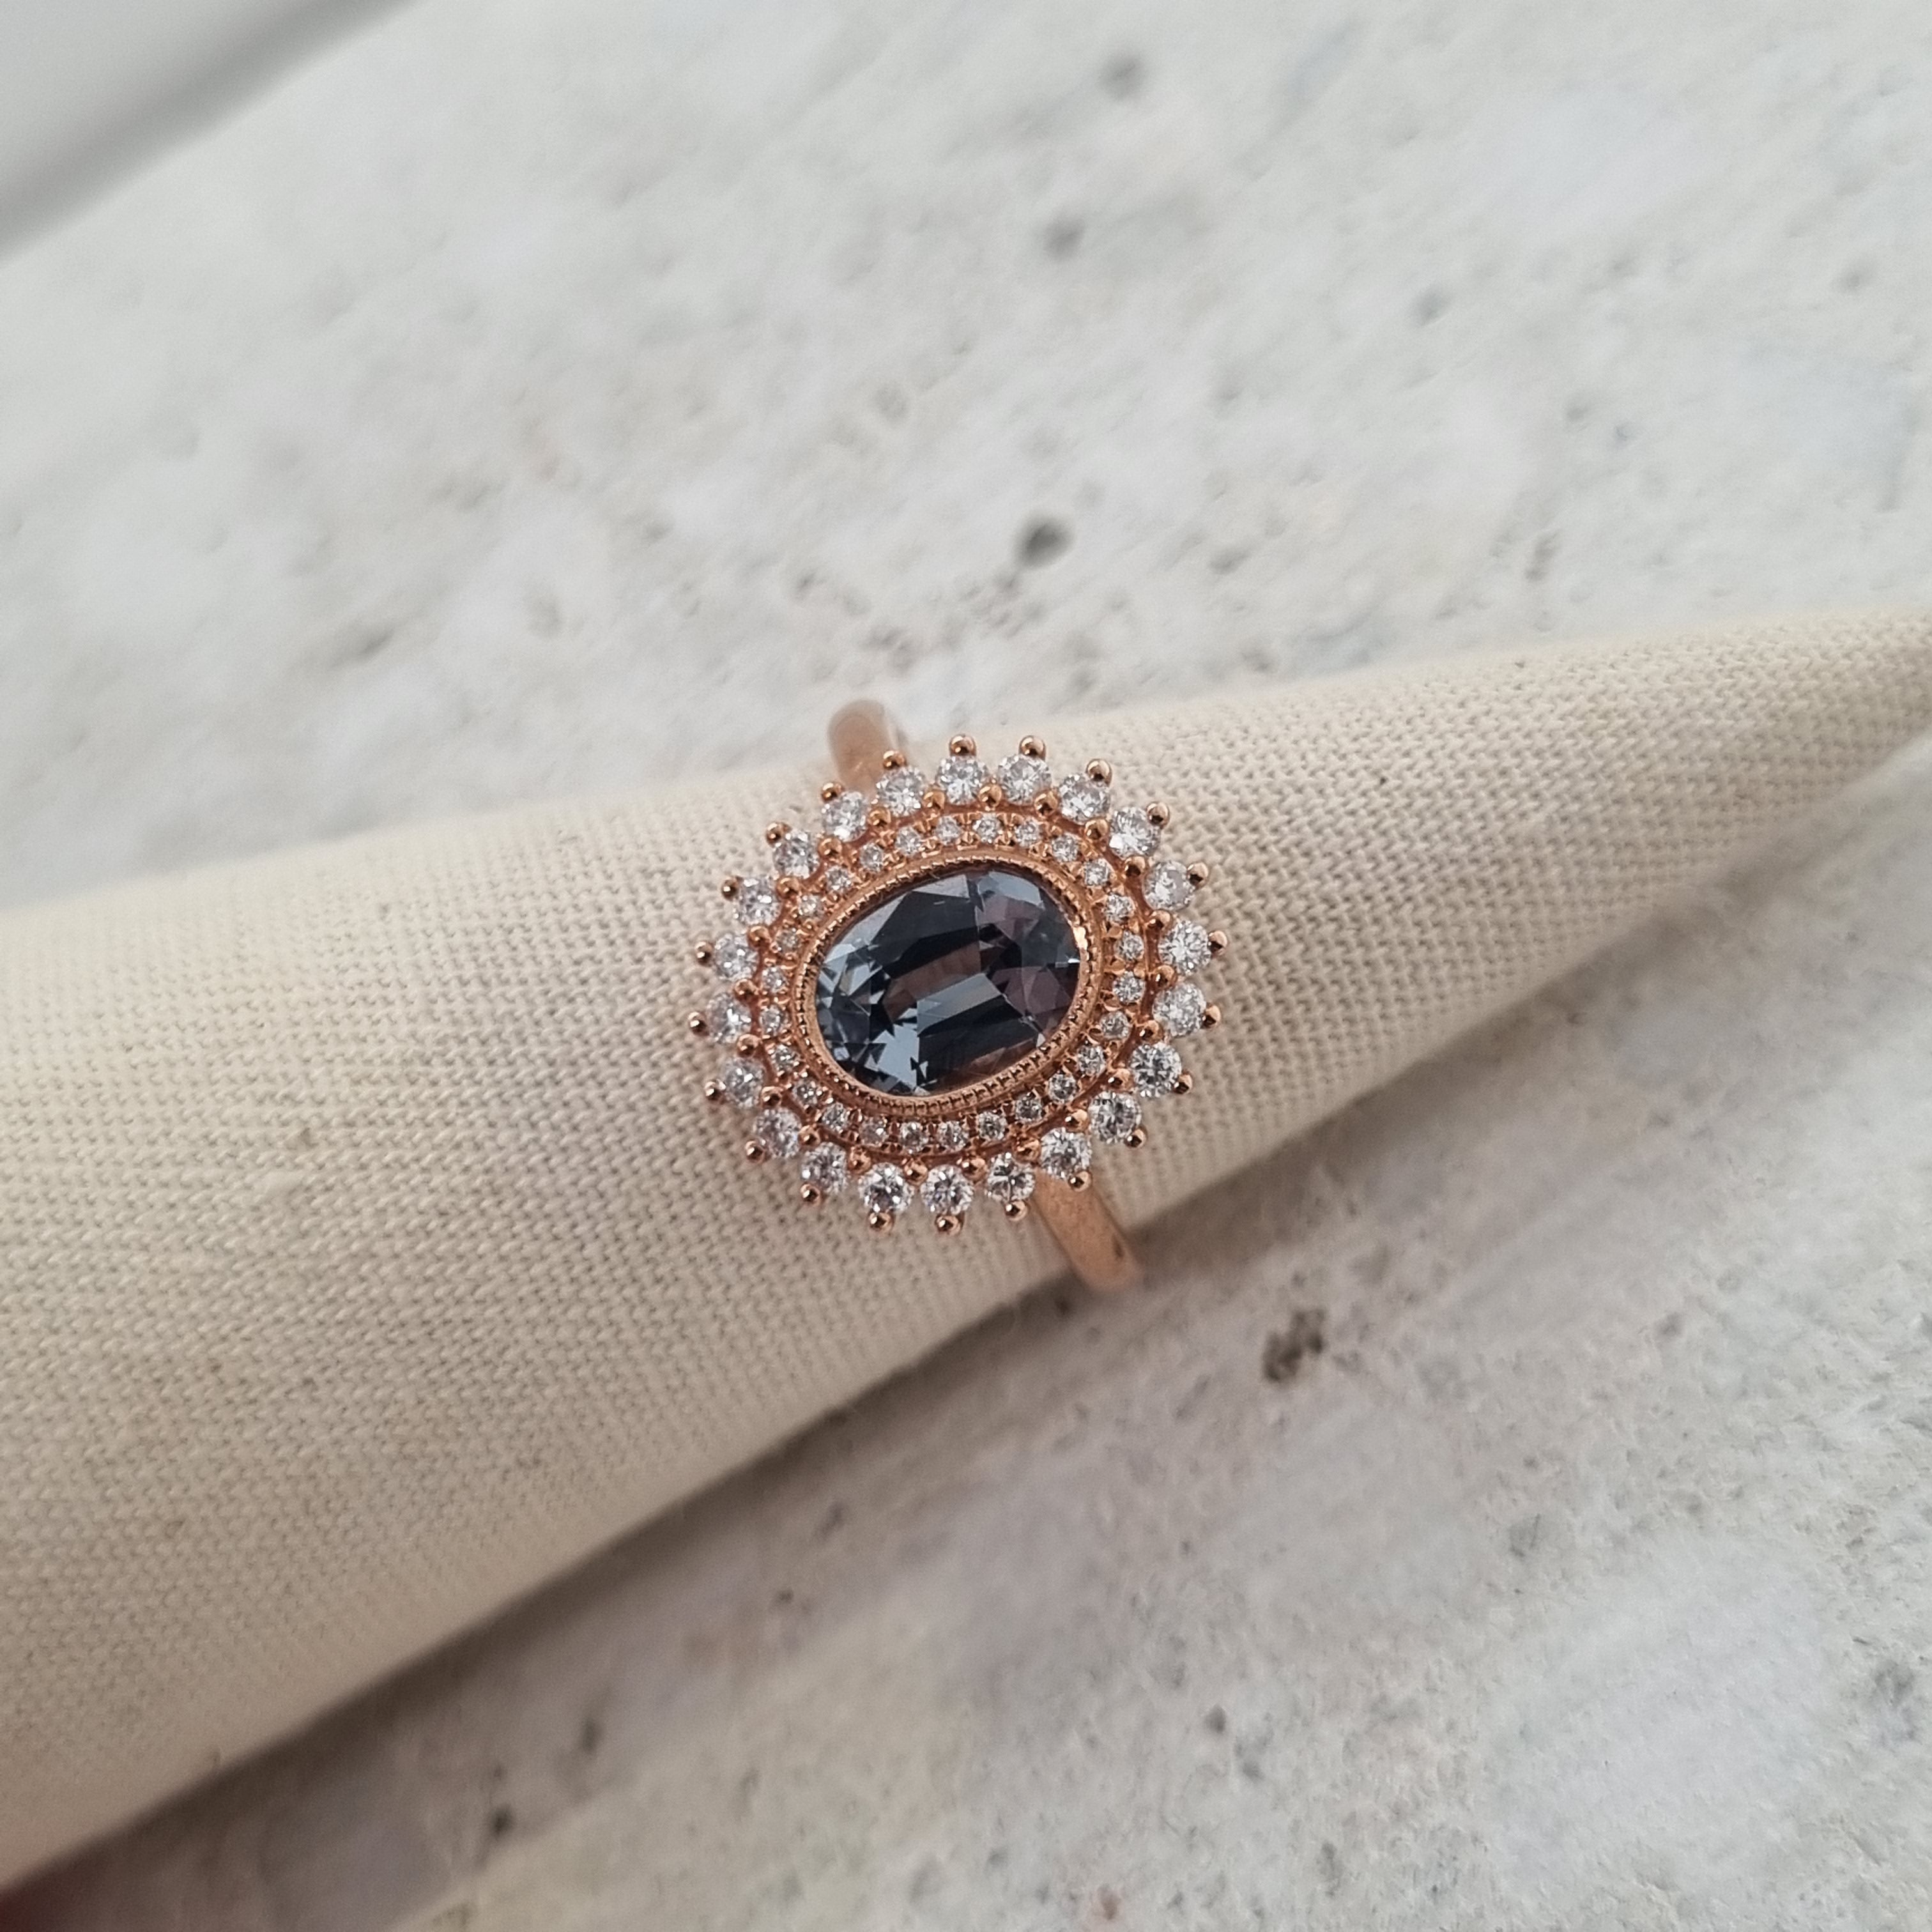 9ct Rose Gold Double-Halo Ring with Myanmar Spinel